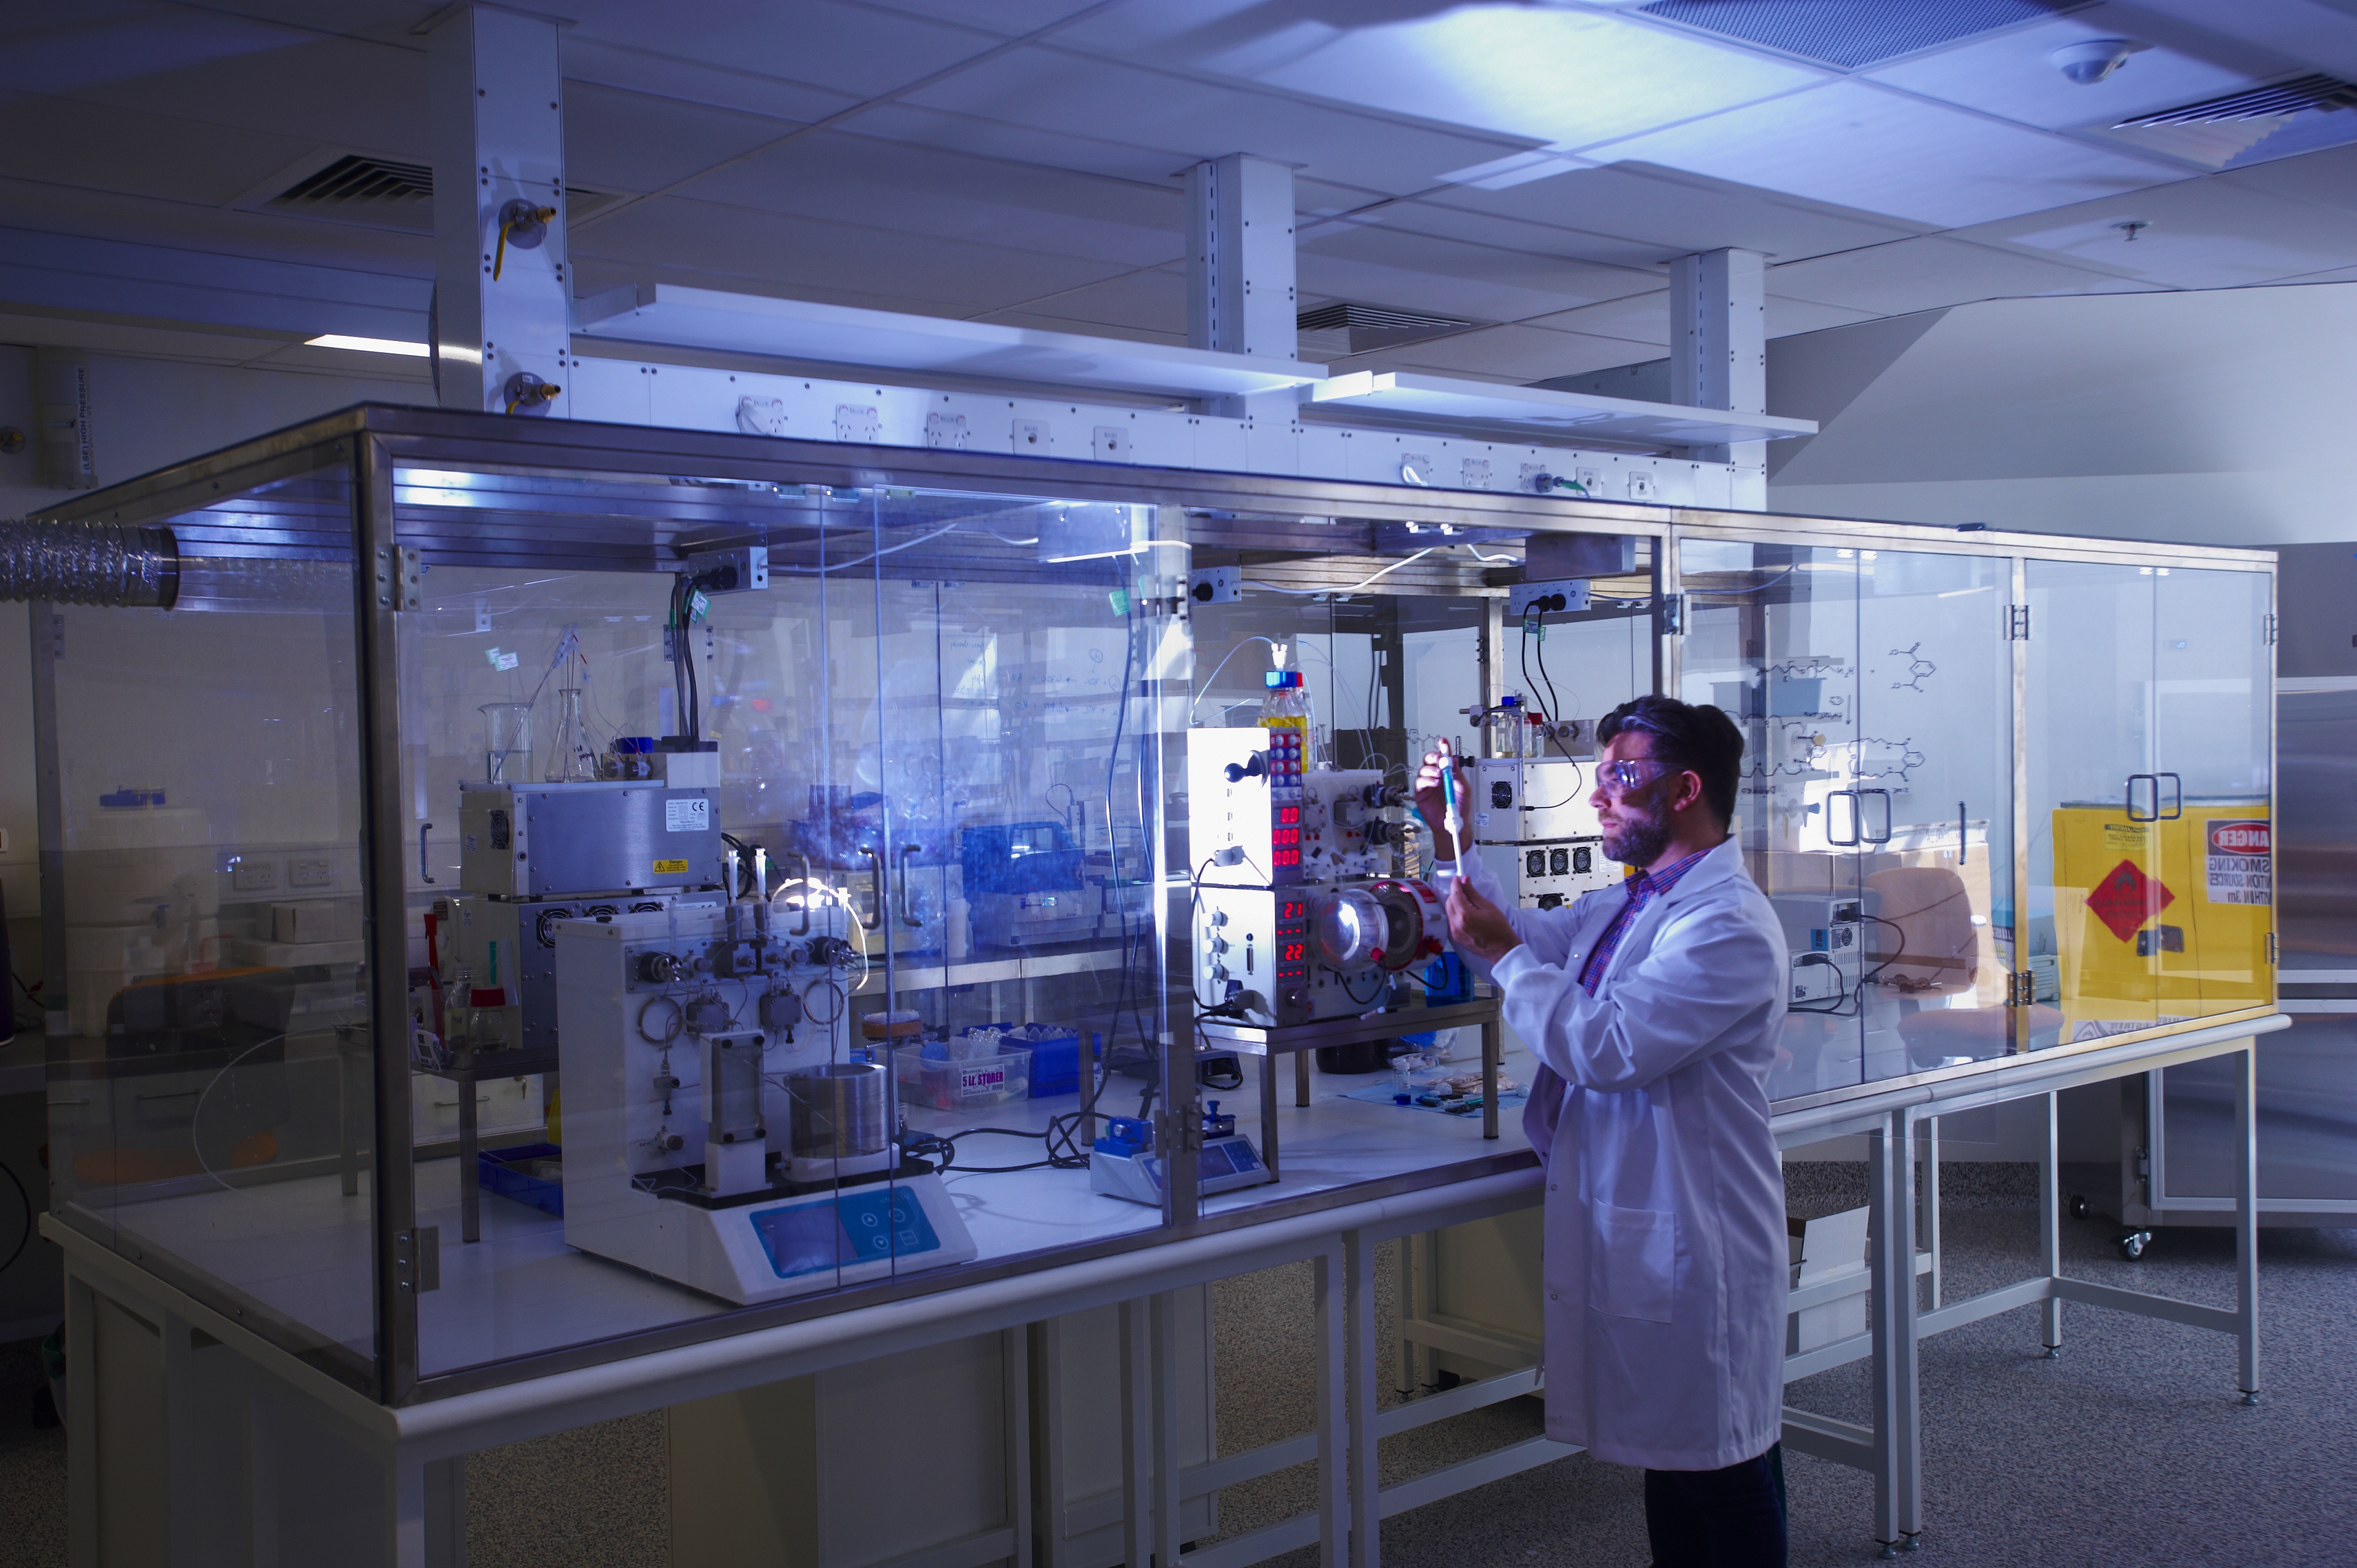 A researcher in a lab coat stands in front of machines in a glass cabinet